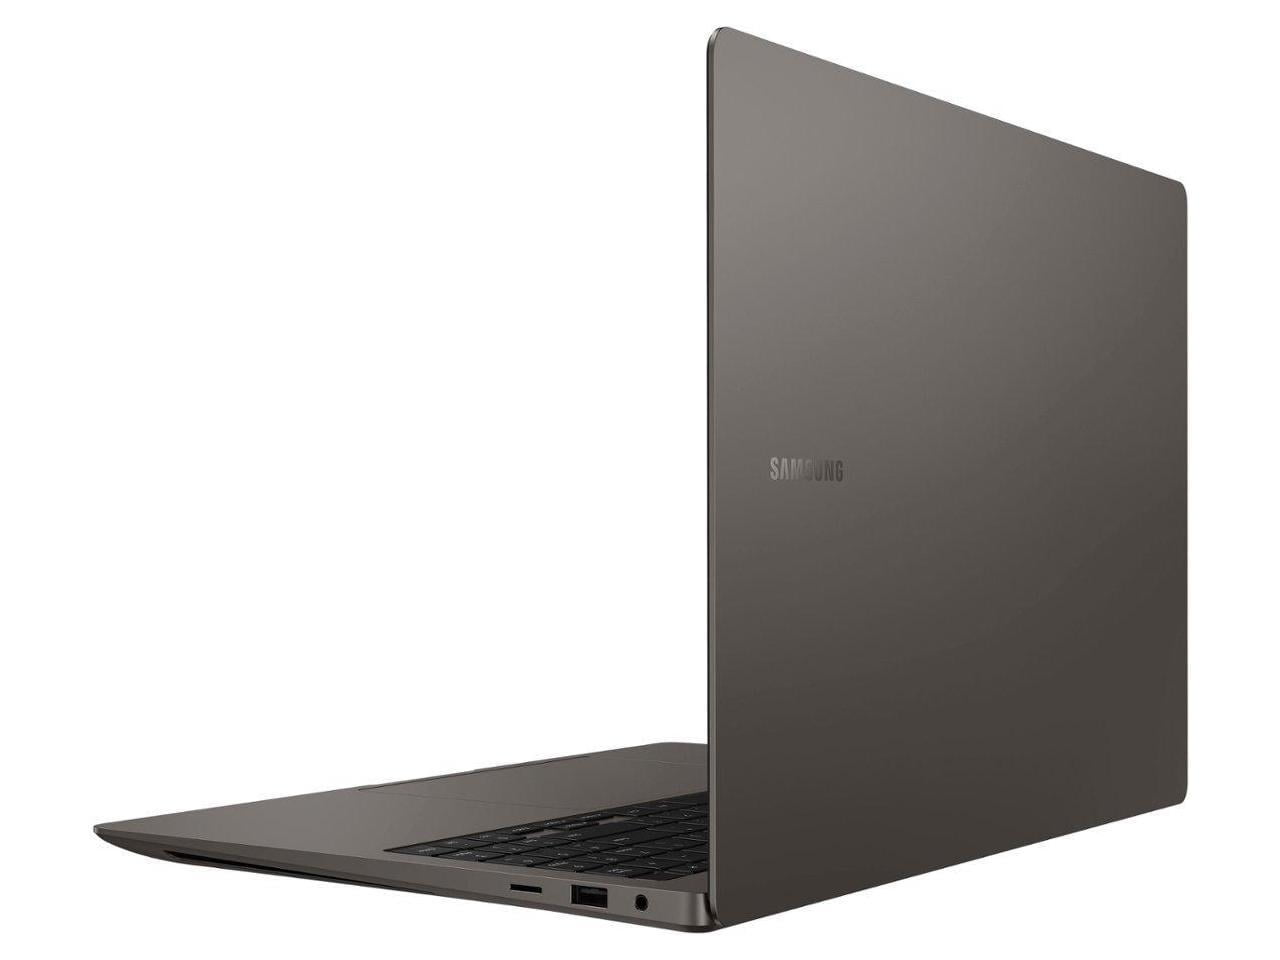 Samsung Galaxy Book3 Pro 360: Samsung's Latest 2-in-1 Laptop Provides Users  With Power And Options - Paste Magazine